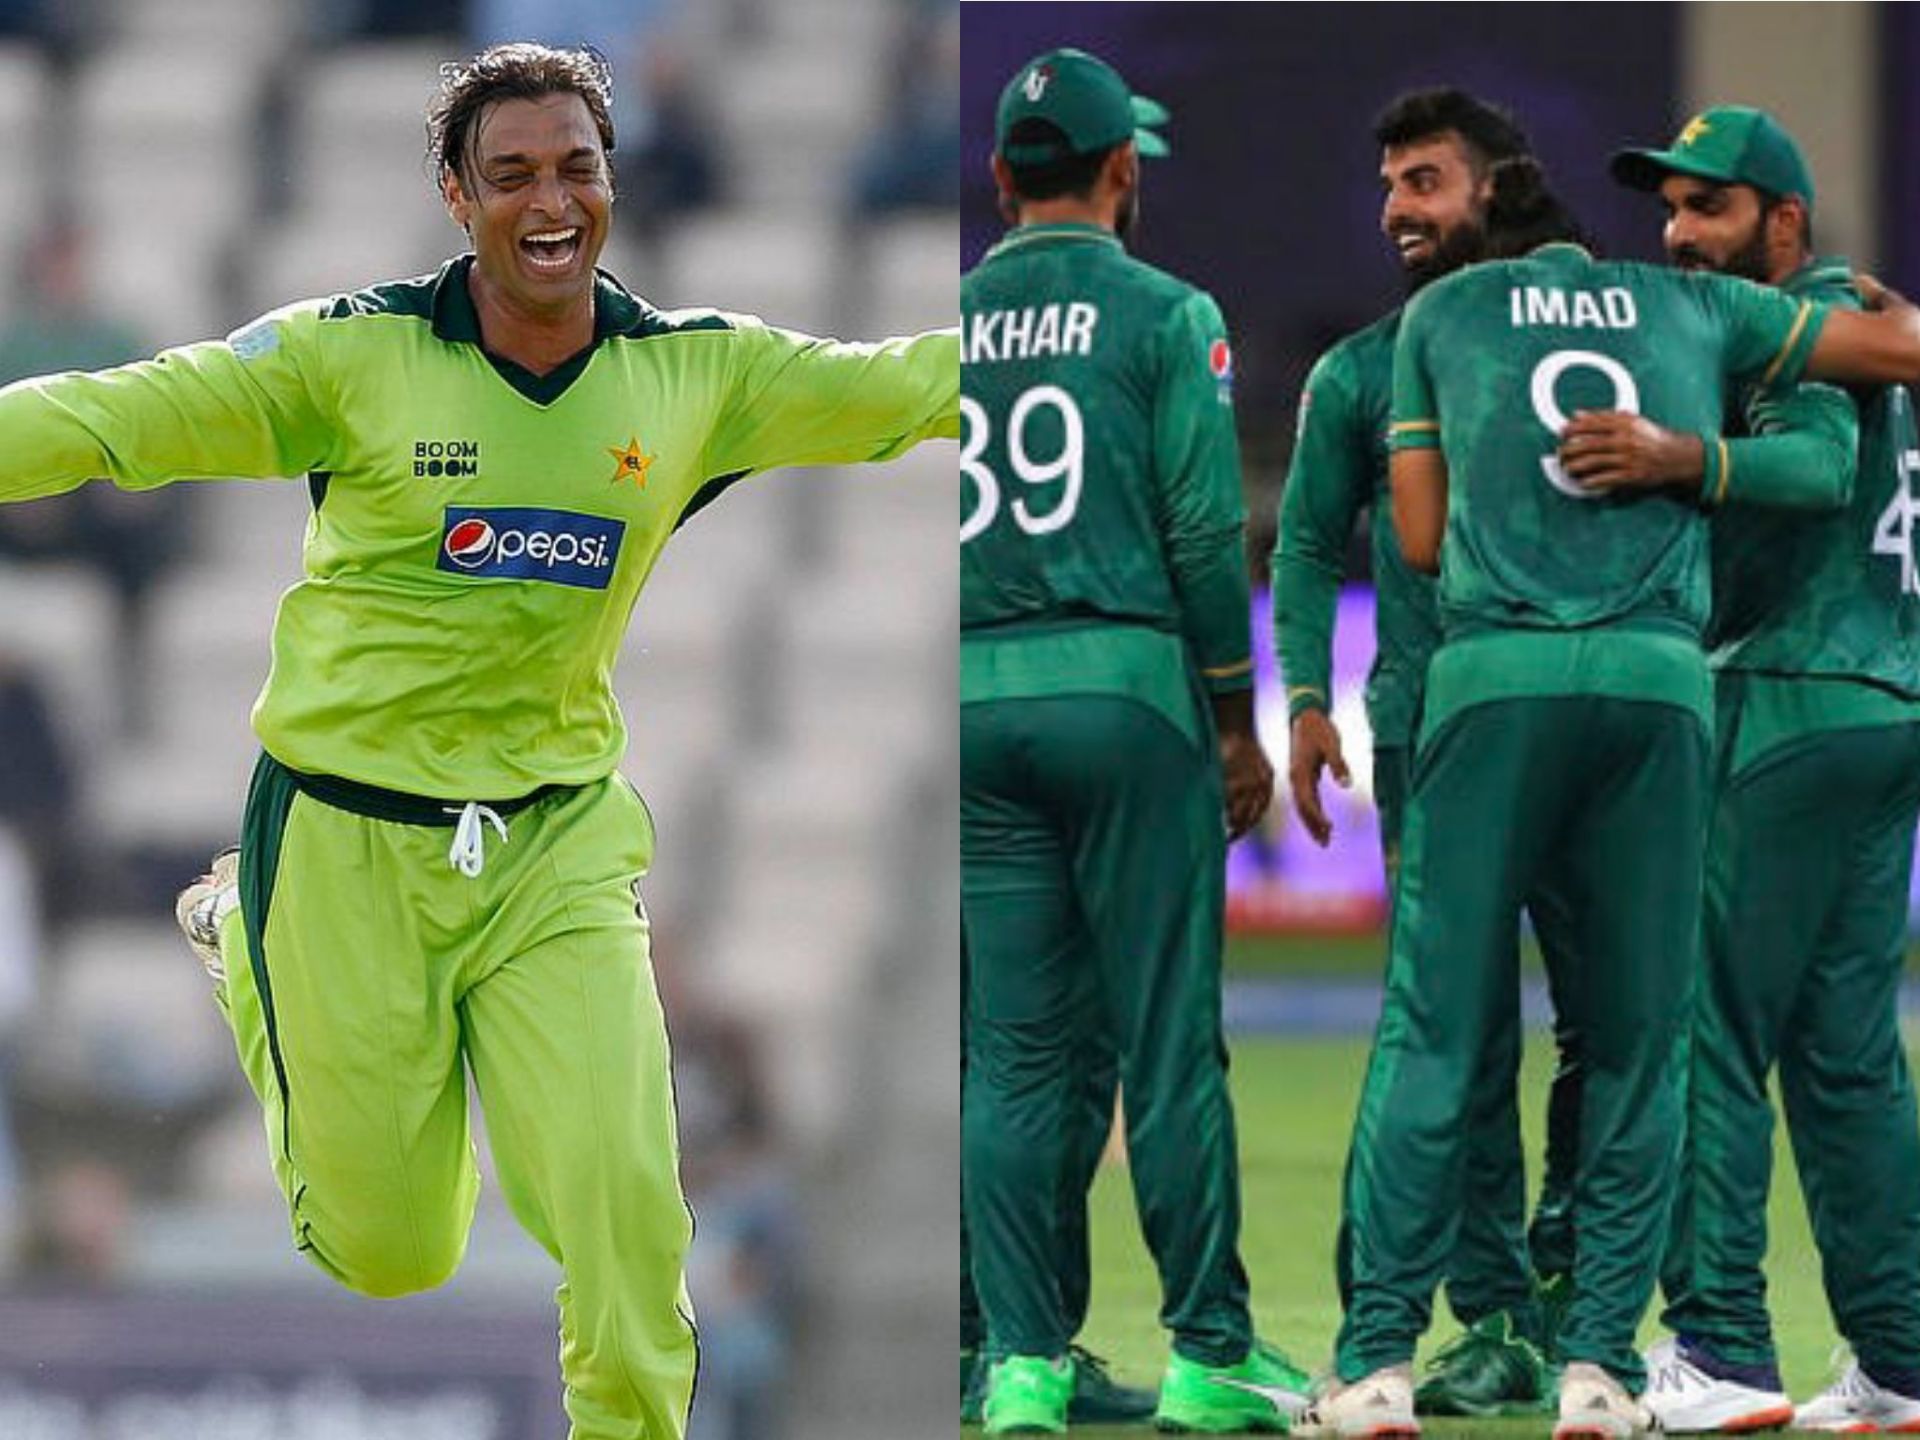 Shoaib Akhtar believes Pakistan have it in them to lift the 2021 T20 World Cup